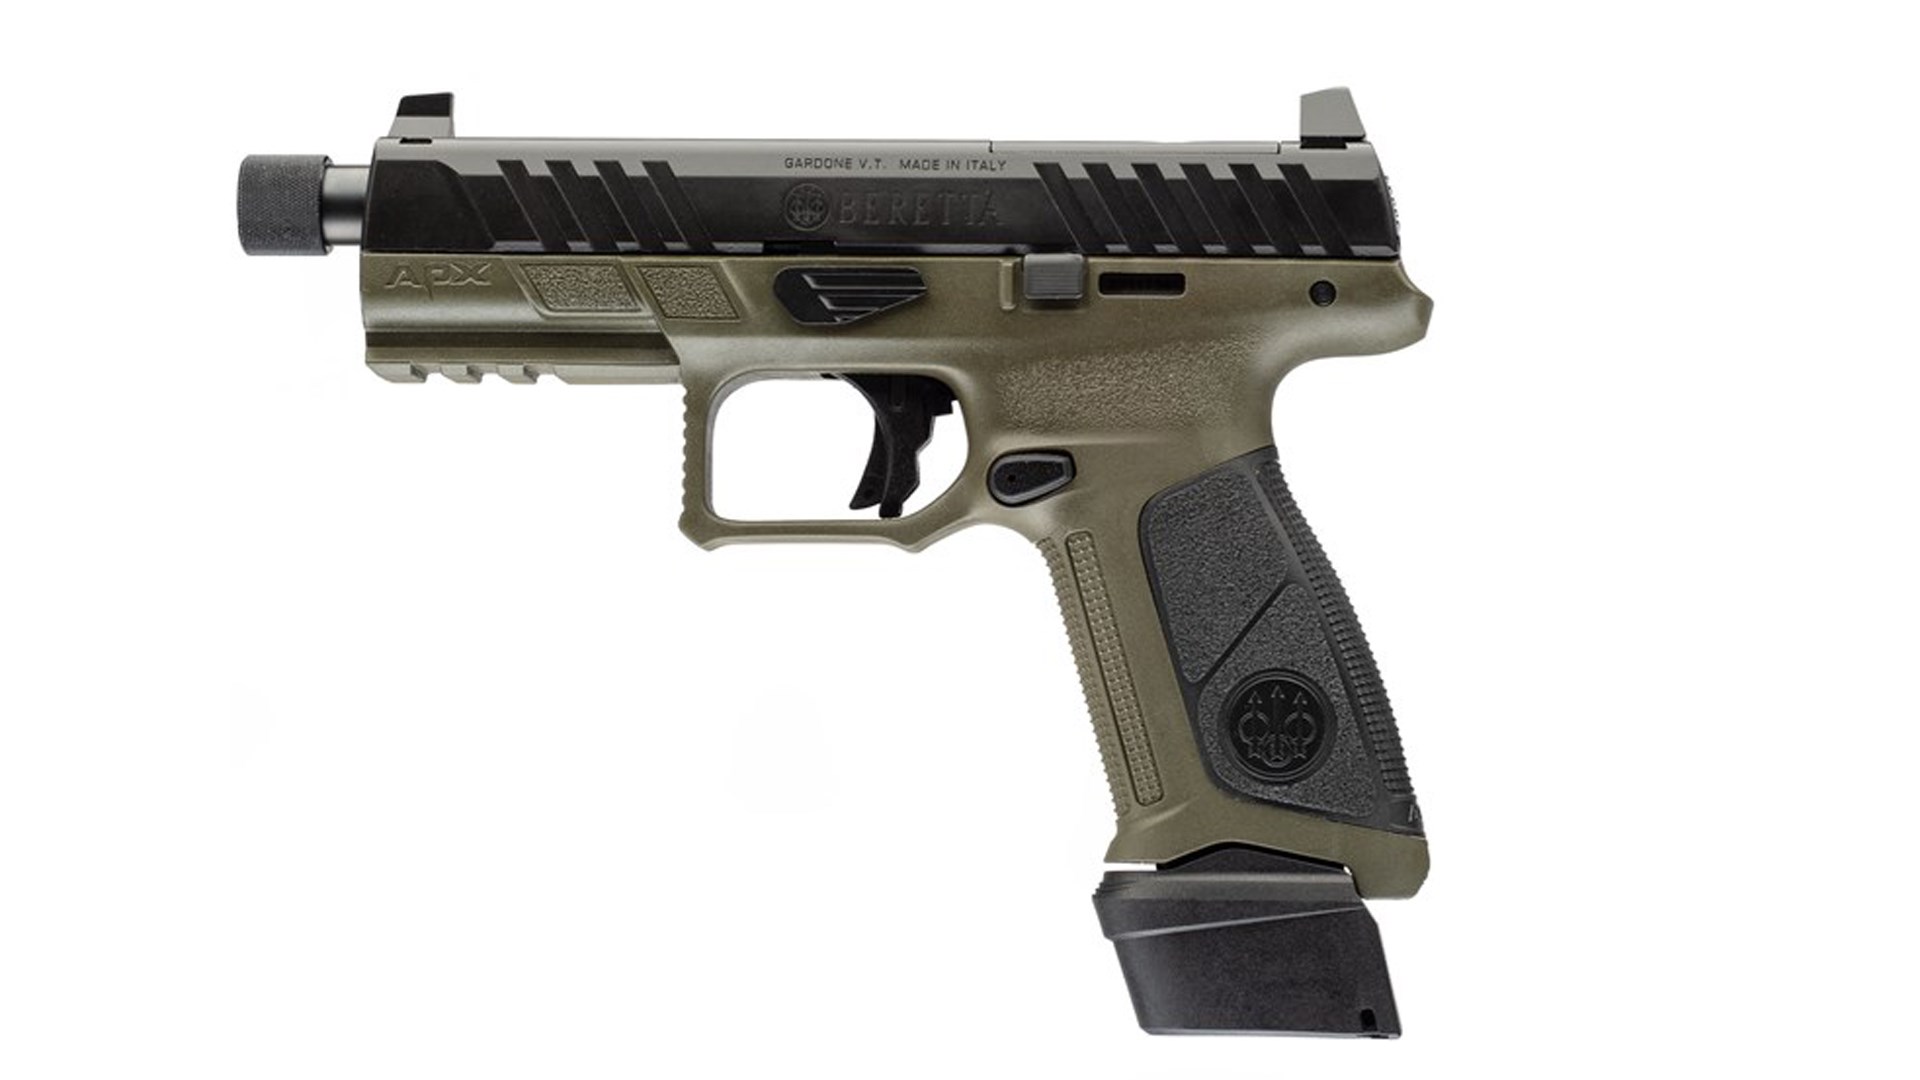 Left side of the black and green Beretta APX A1 Tactical pistol, shown with an extended 21-round magazine.